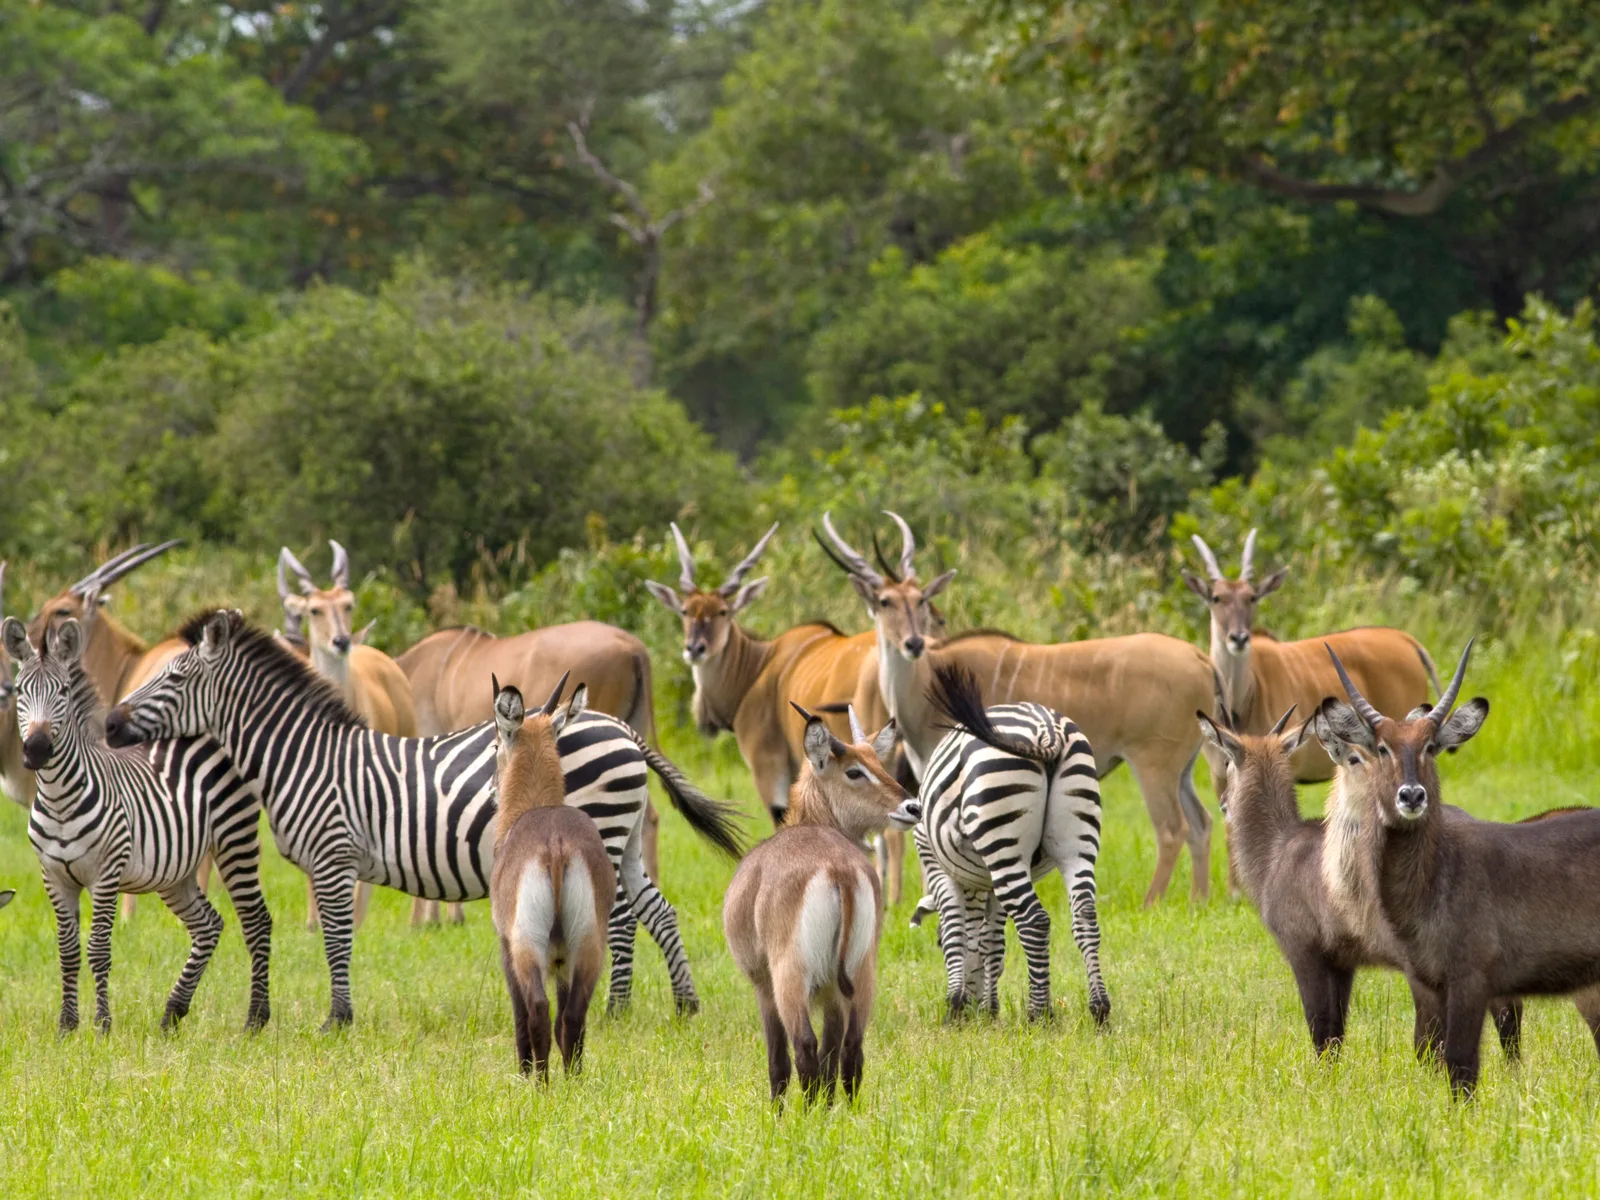 As seen at one of the best safaris in Africa, the Katavi National Park, mixed herd of zebras and waterbuck